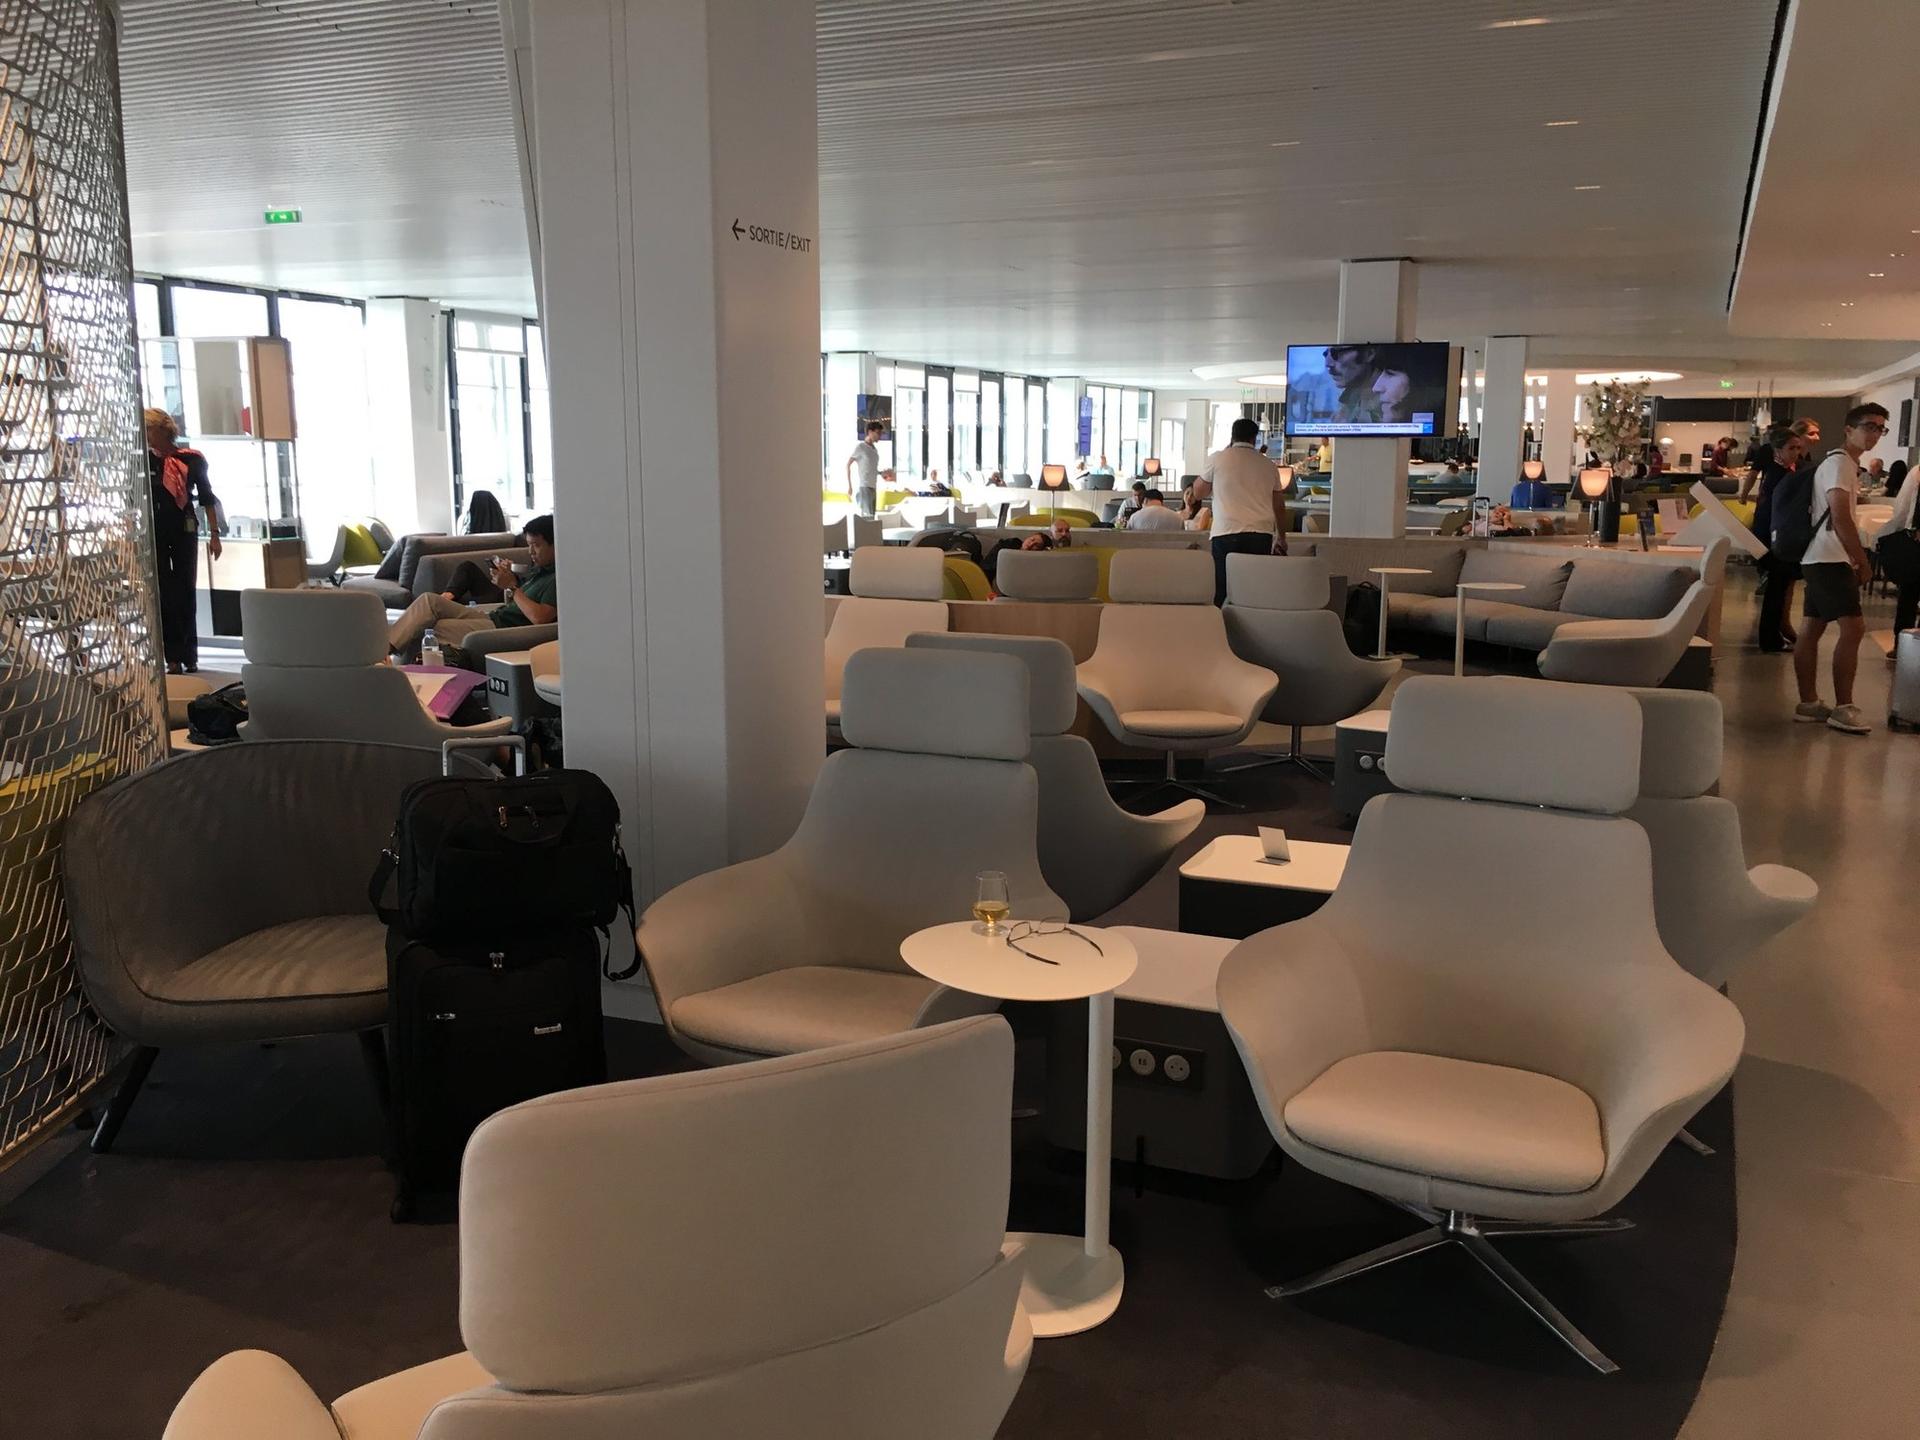 Air France Lounge (Concourse L) image 8 of 57